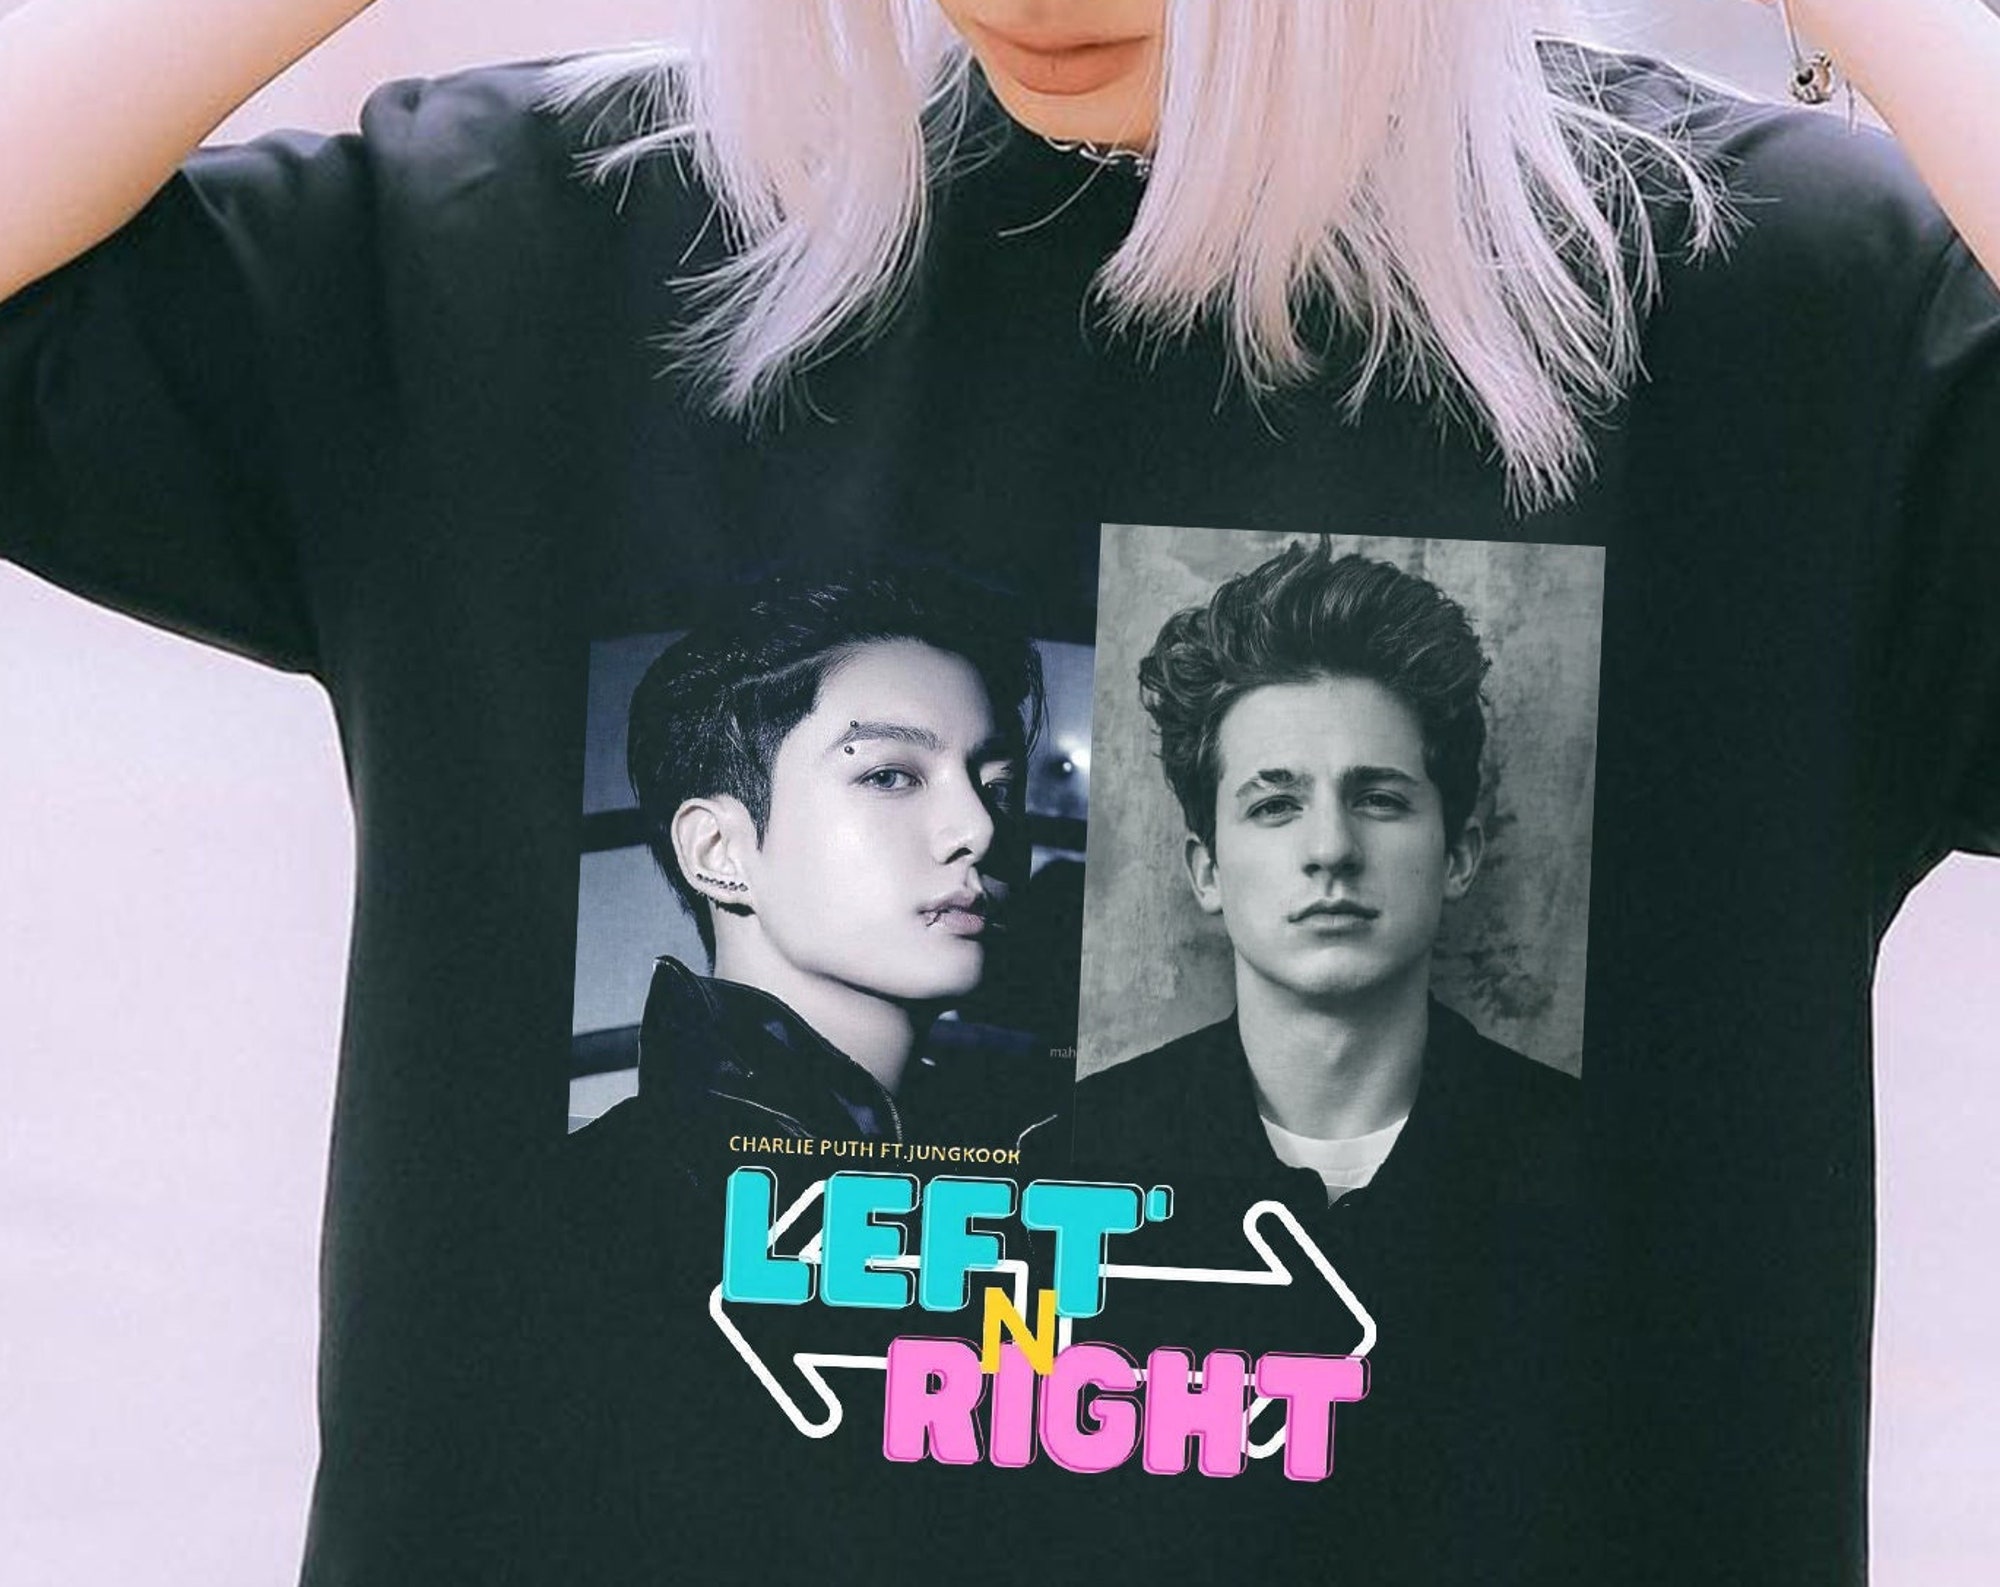 Left and Right with Jungkook Tshirt, Charlie Puth Collab with Jung Kook of BTS Tshirt